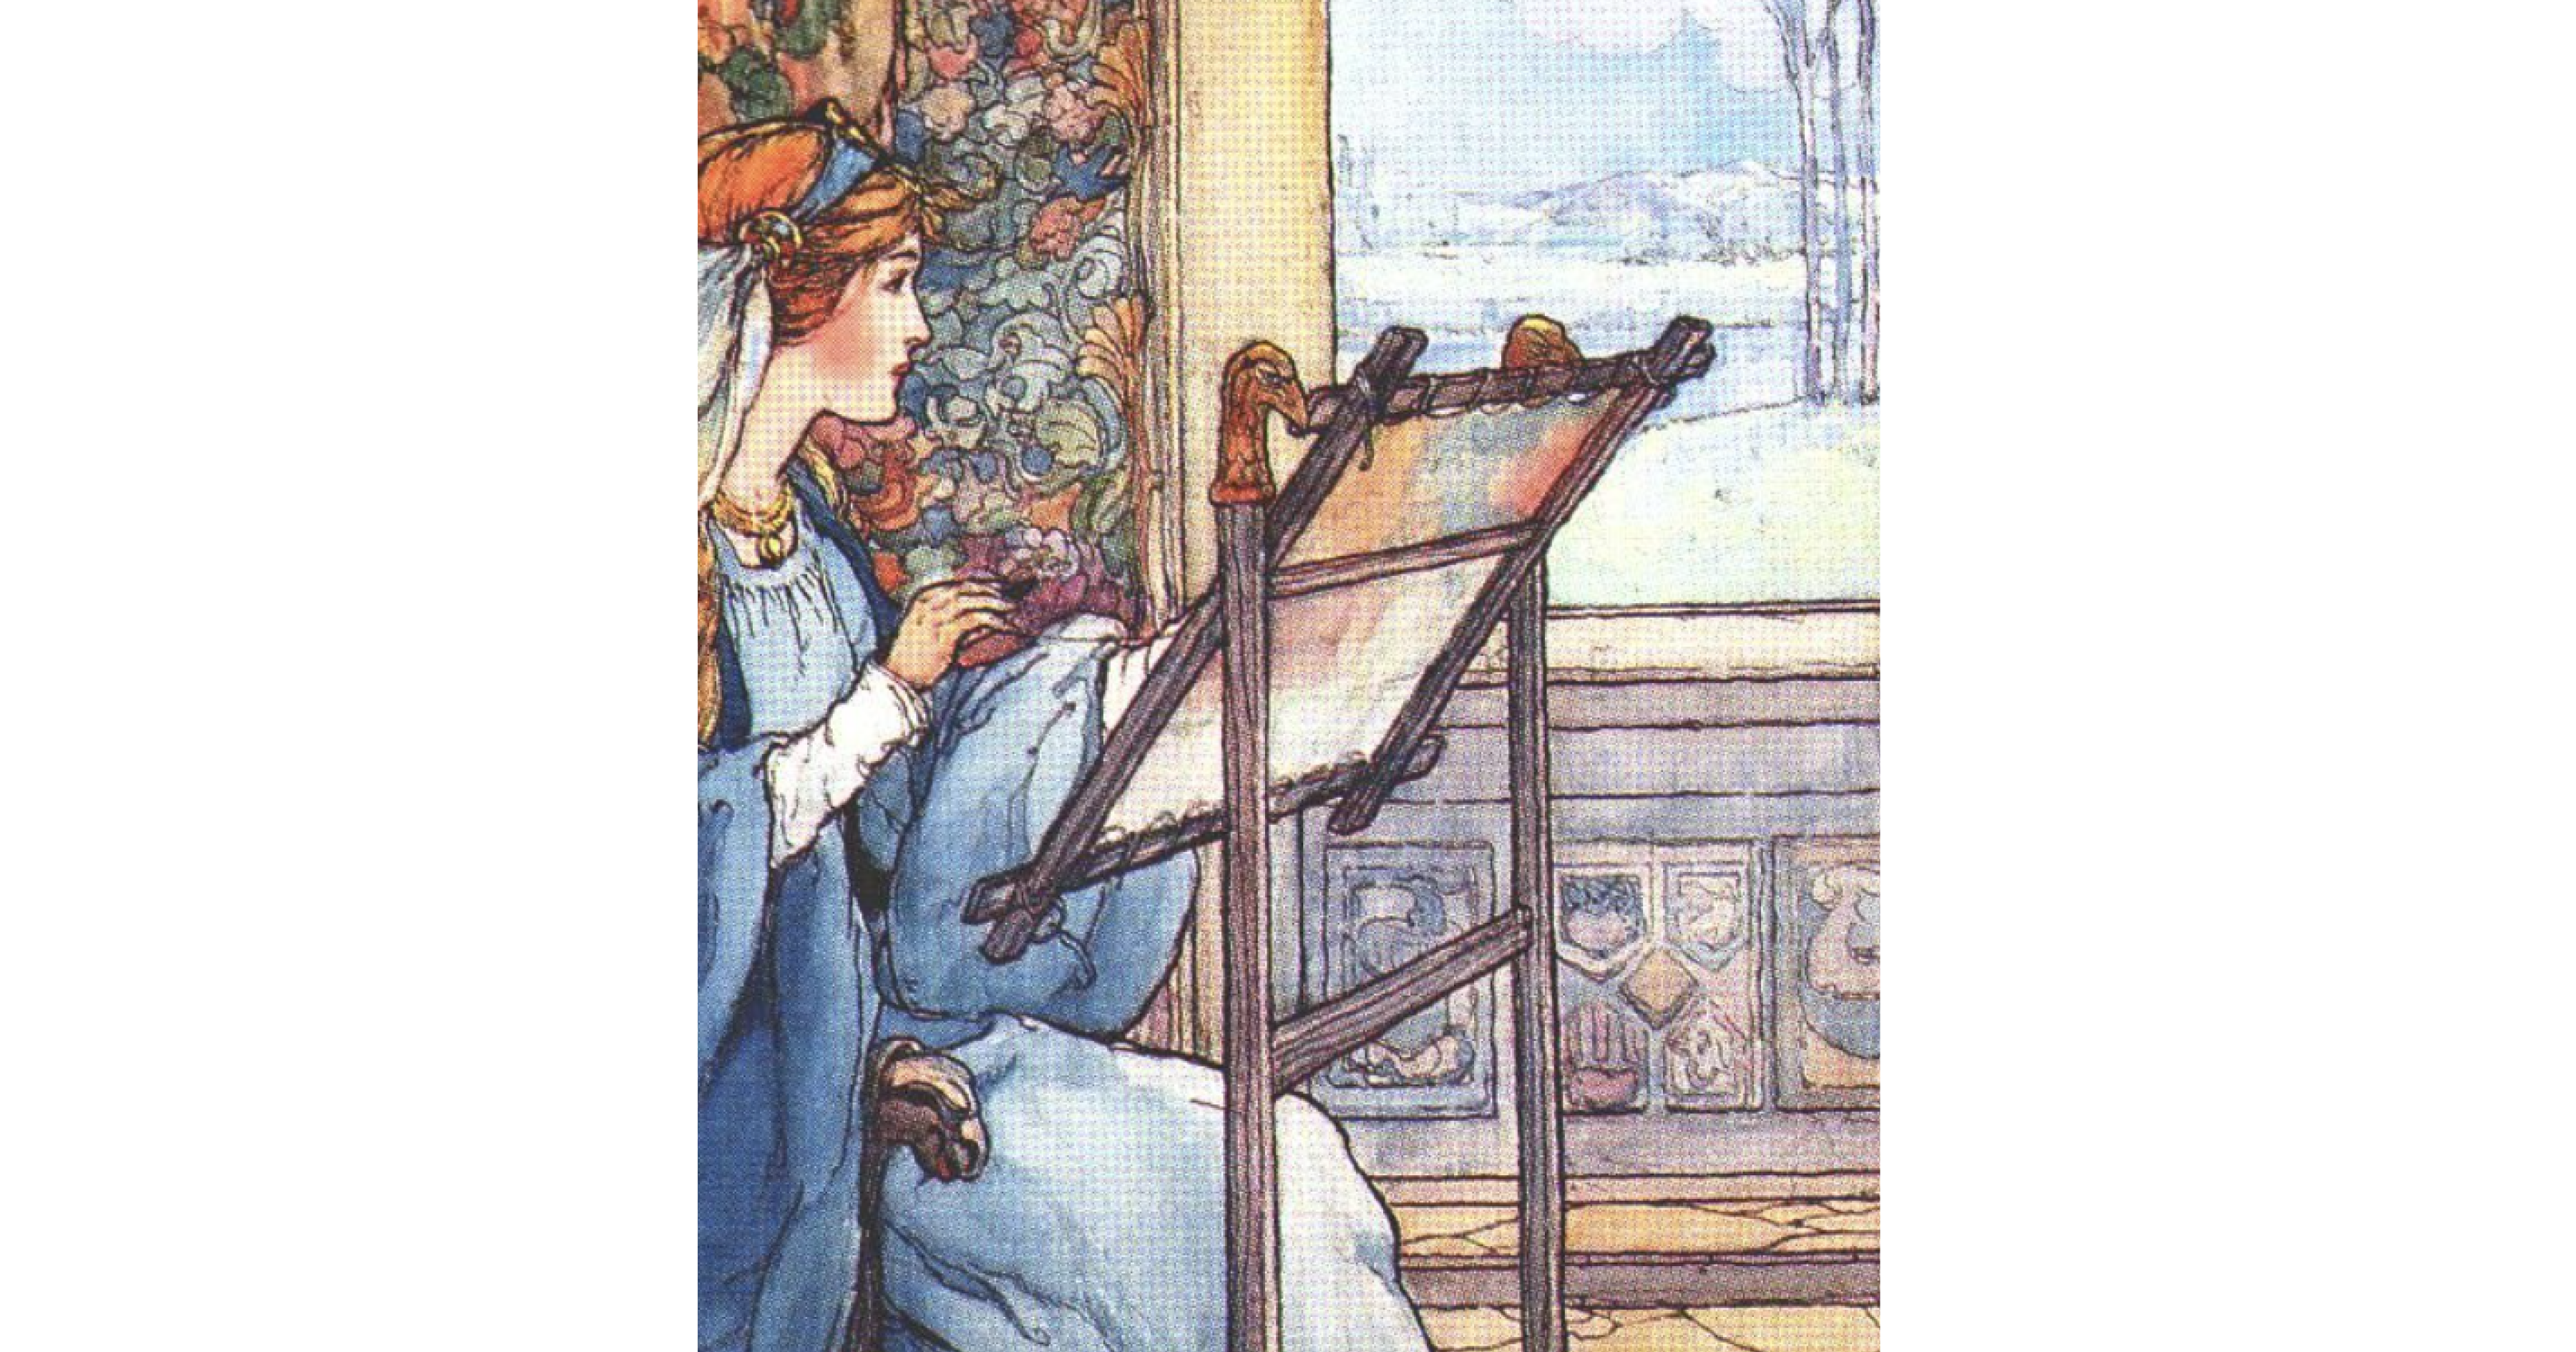 A woman painting looks out the window at a snowy landscape